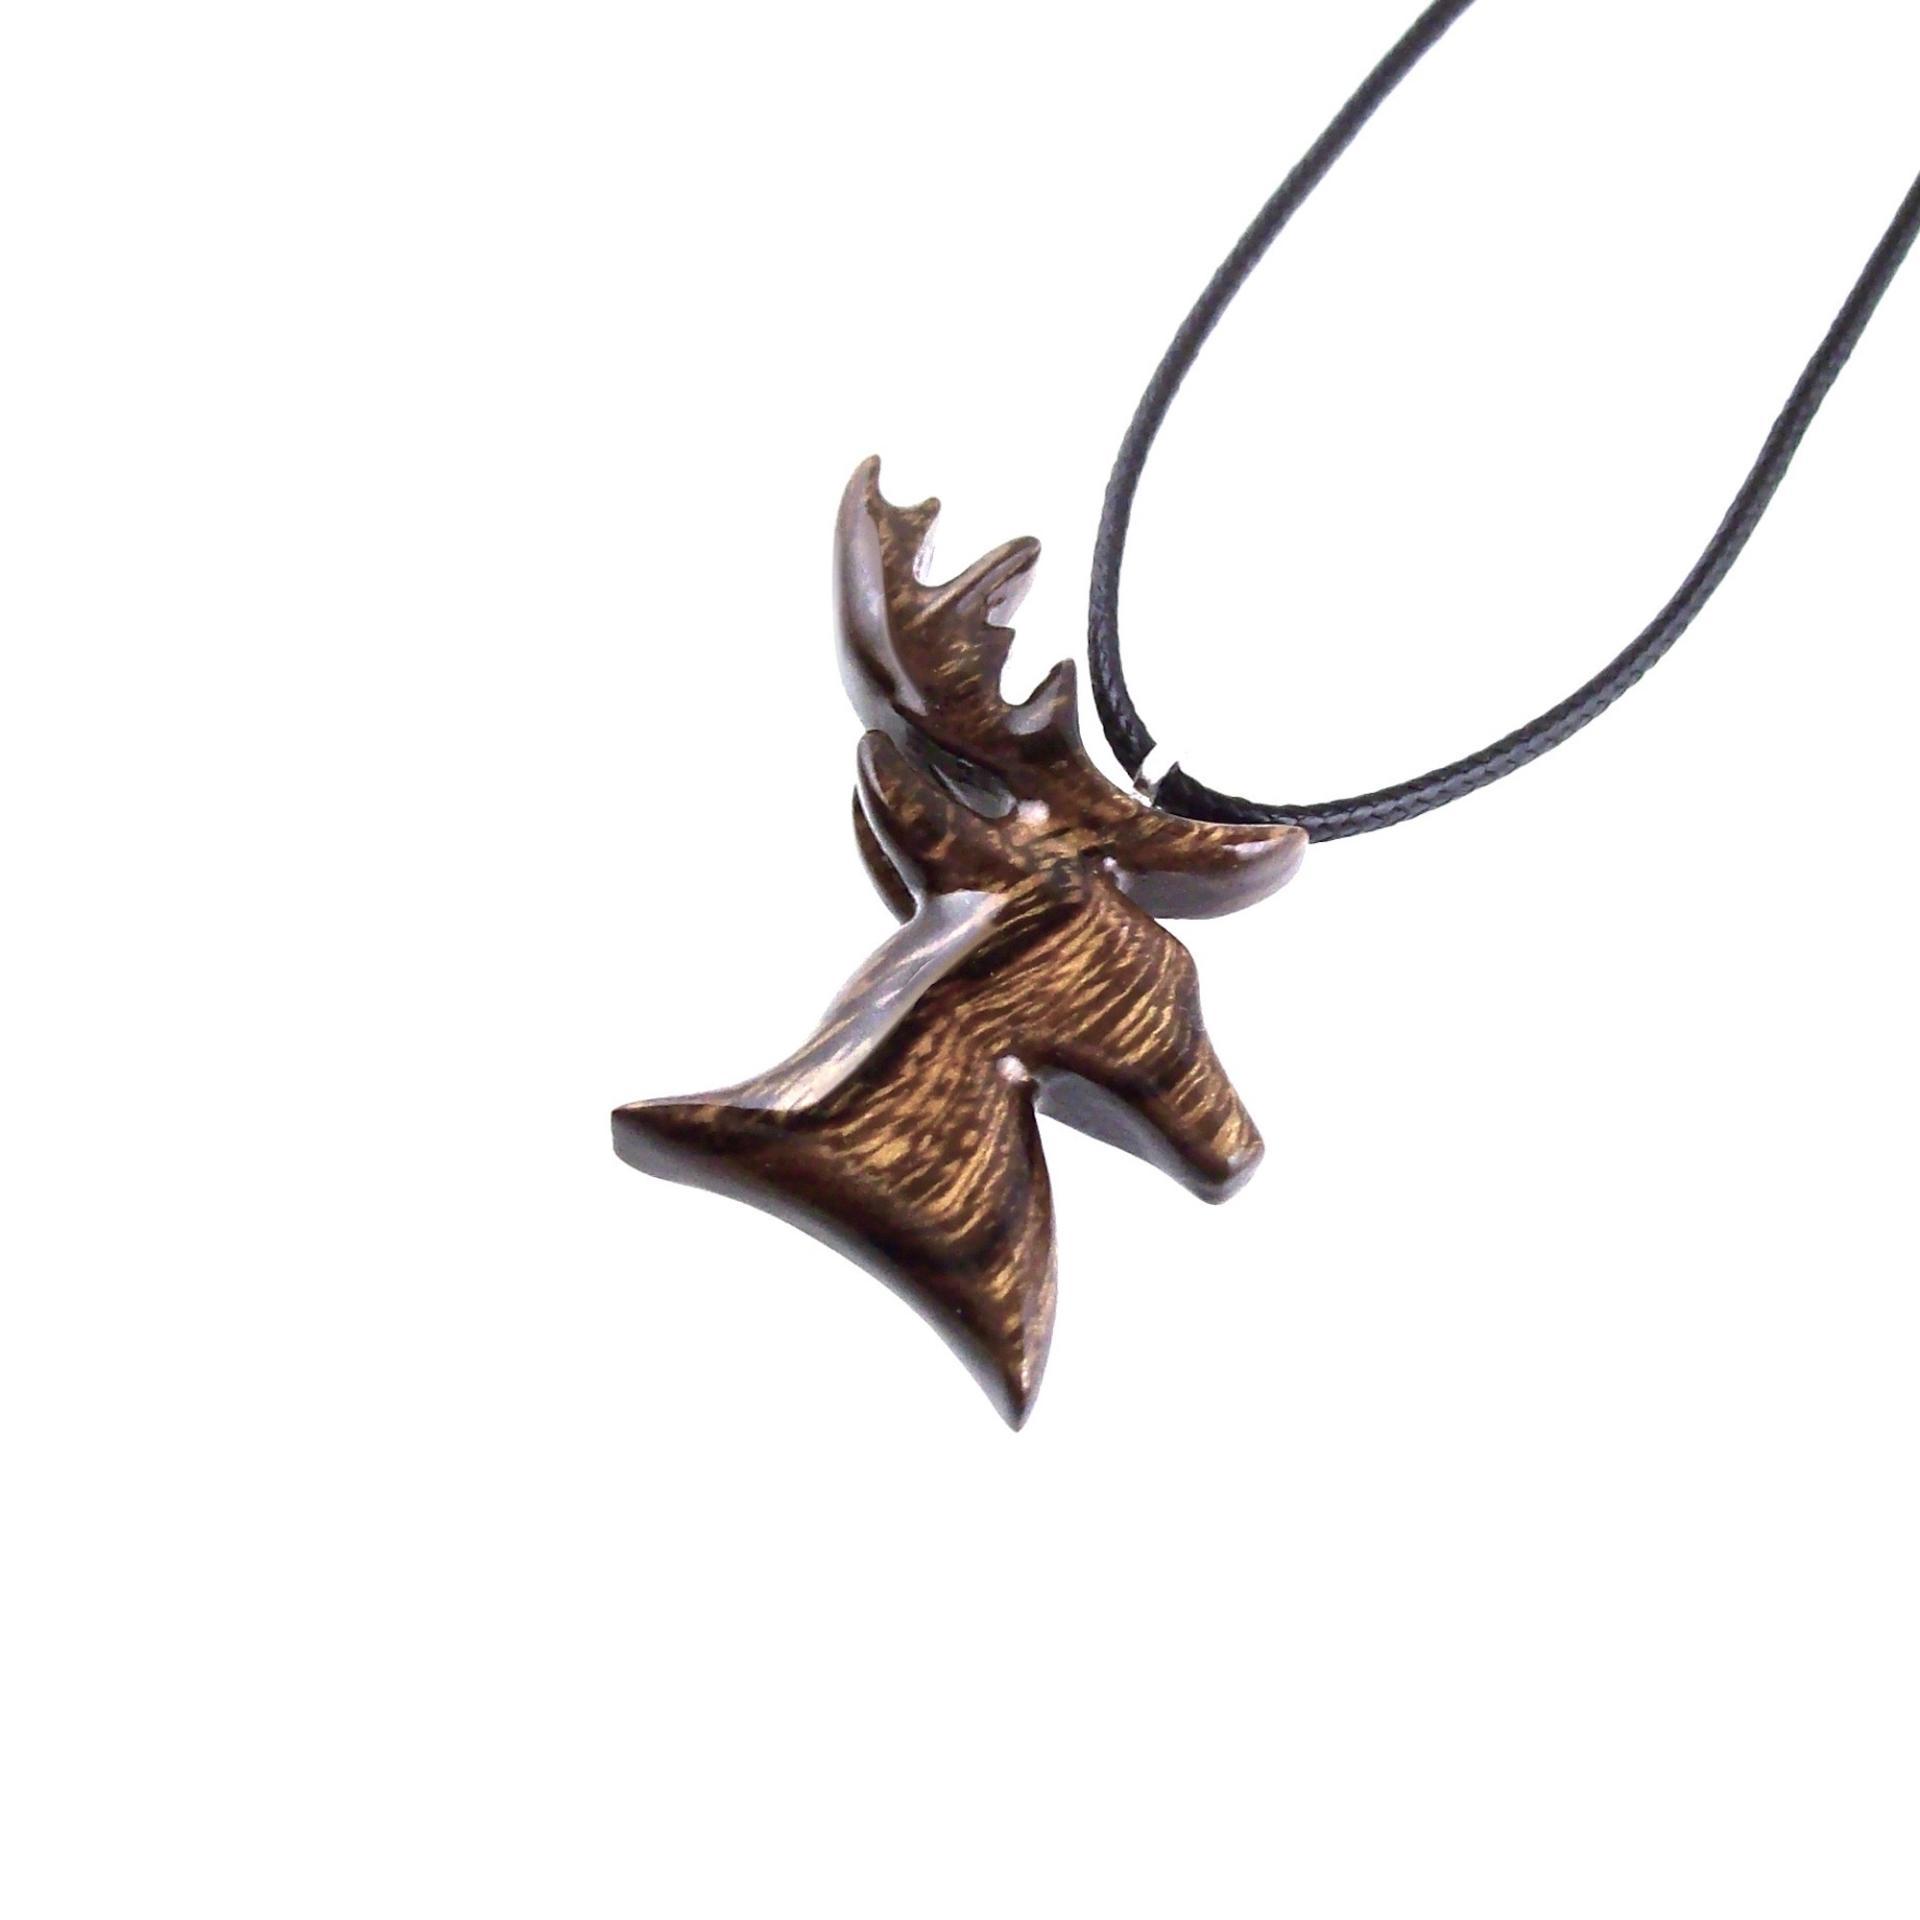 Hand Carved Stag Necklace, Wooden Deer Pendant, Buck Head Necklace, Spirit Animal Totem Gift for Him, Woodland Mens Jewelry